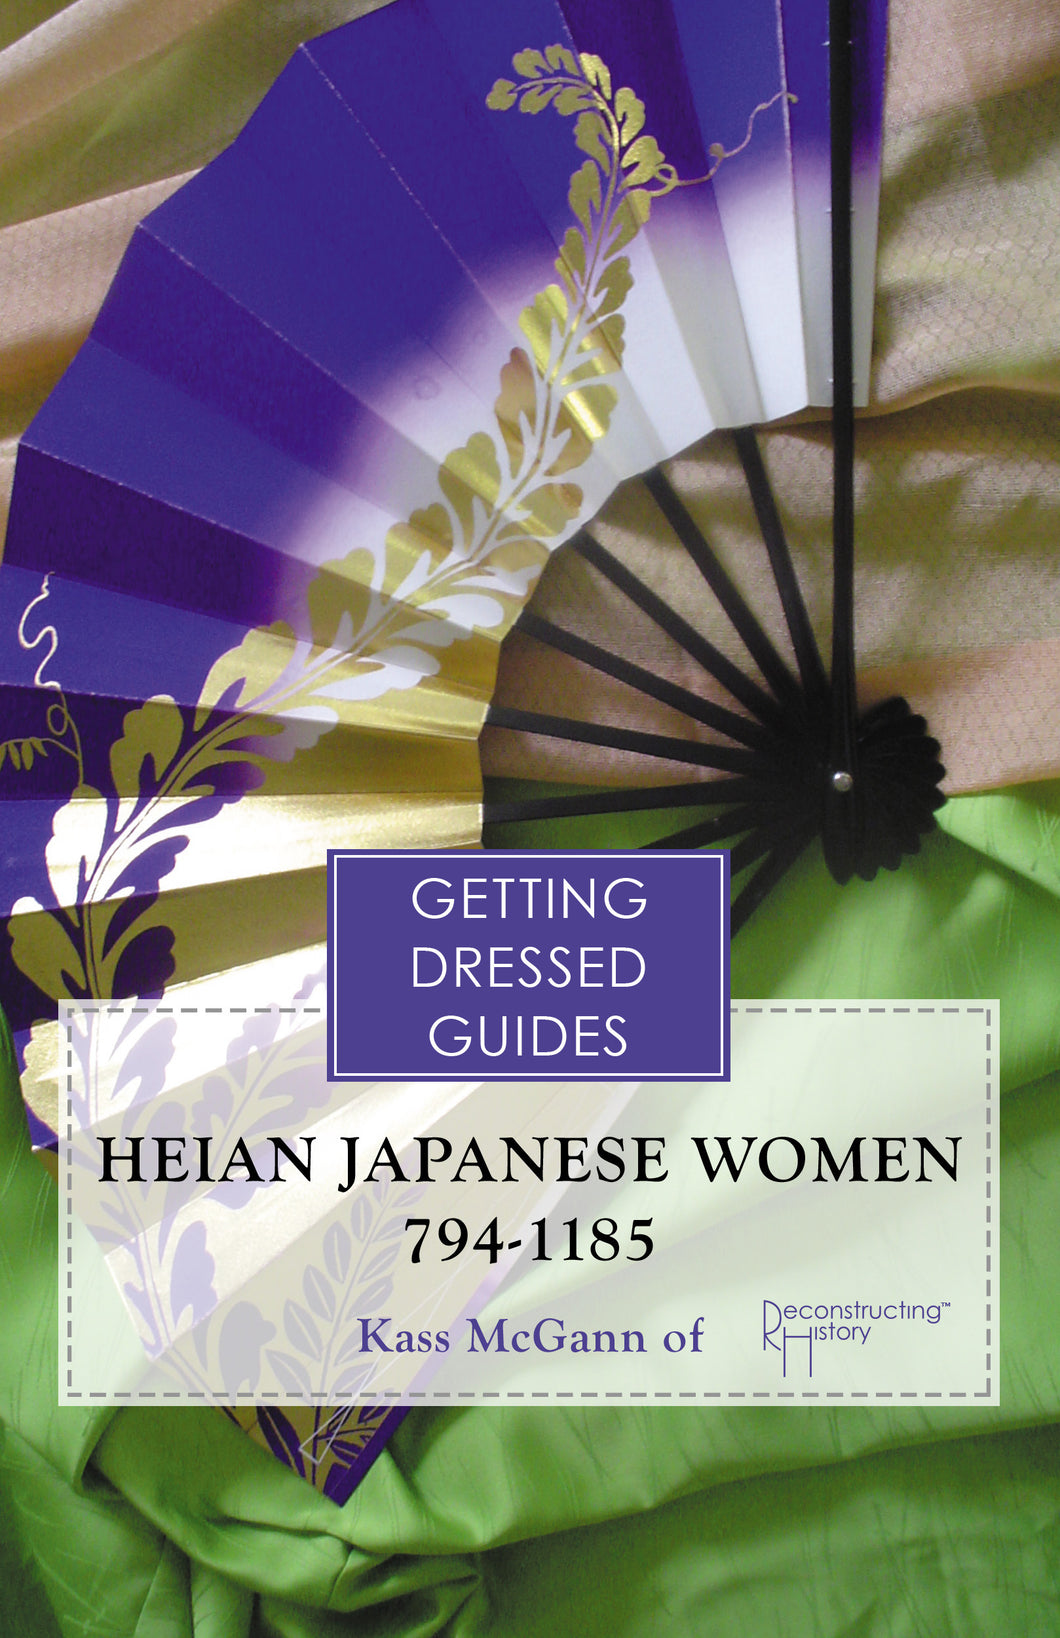 Heian Japanese Women's Getting Dressed Guide